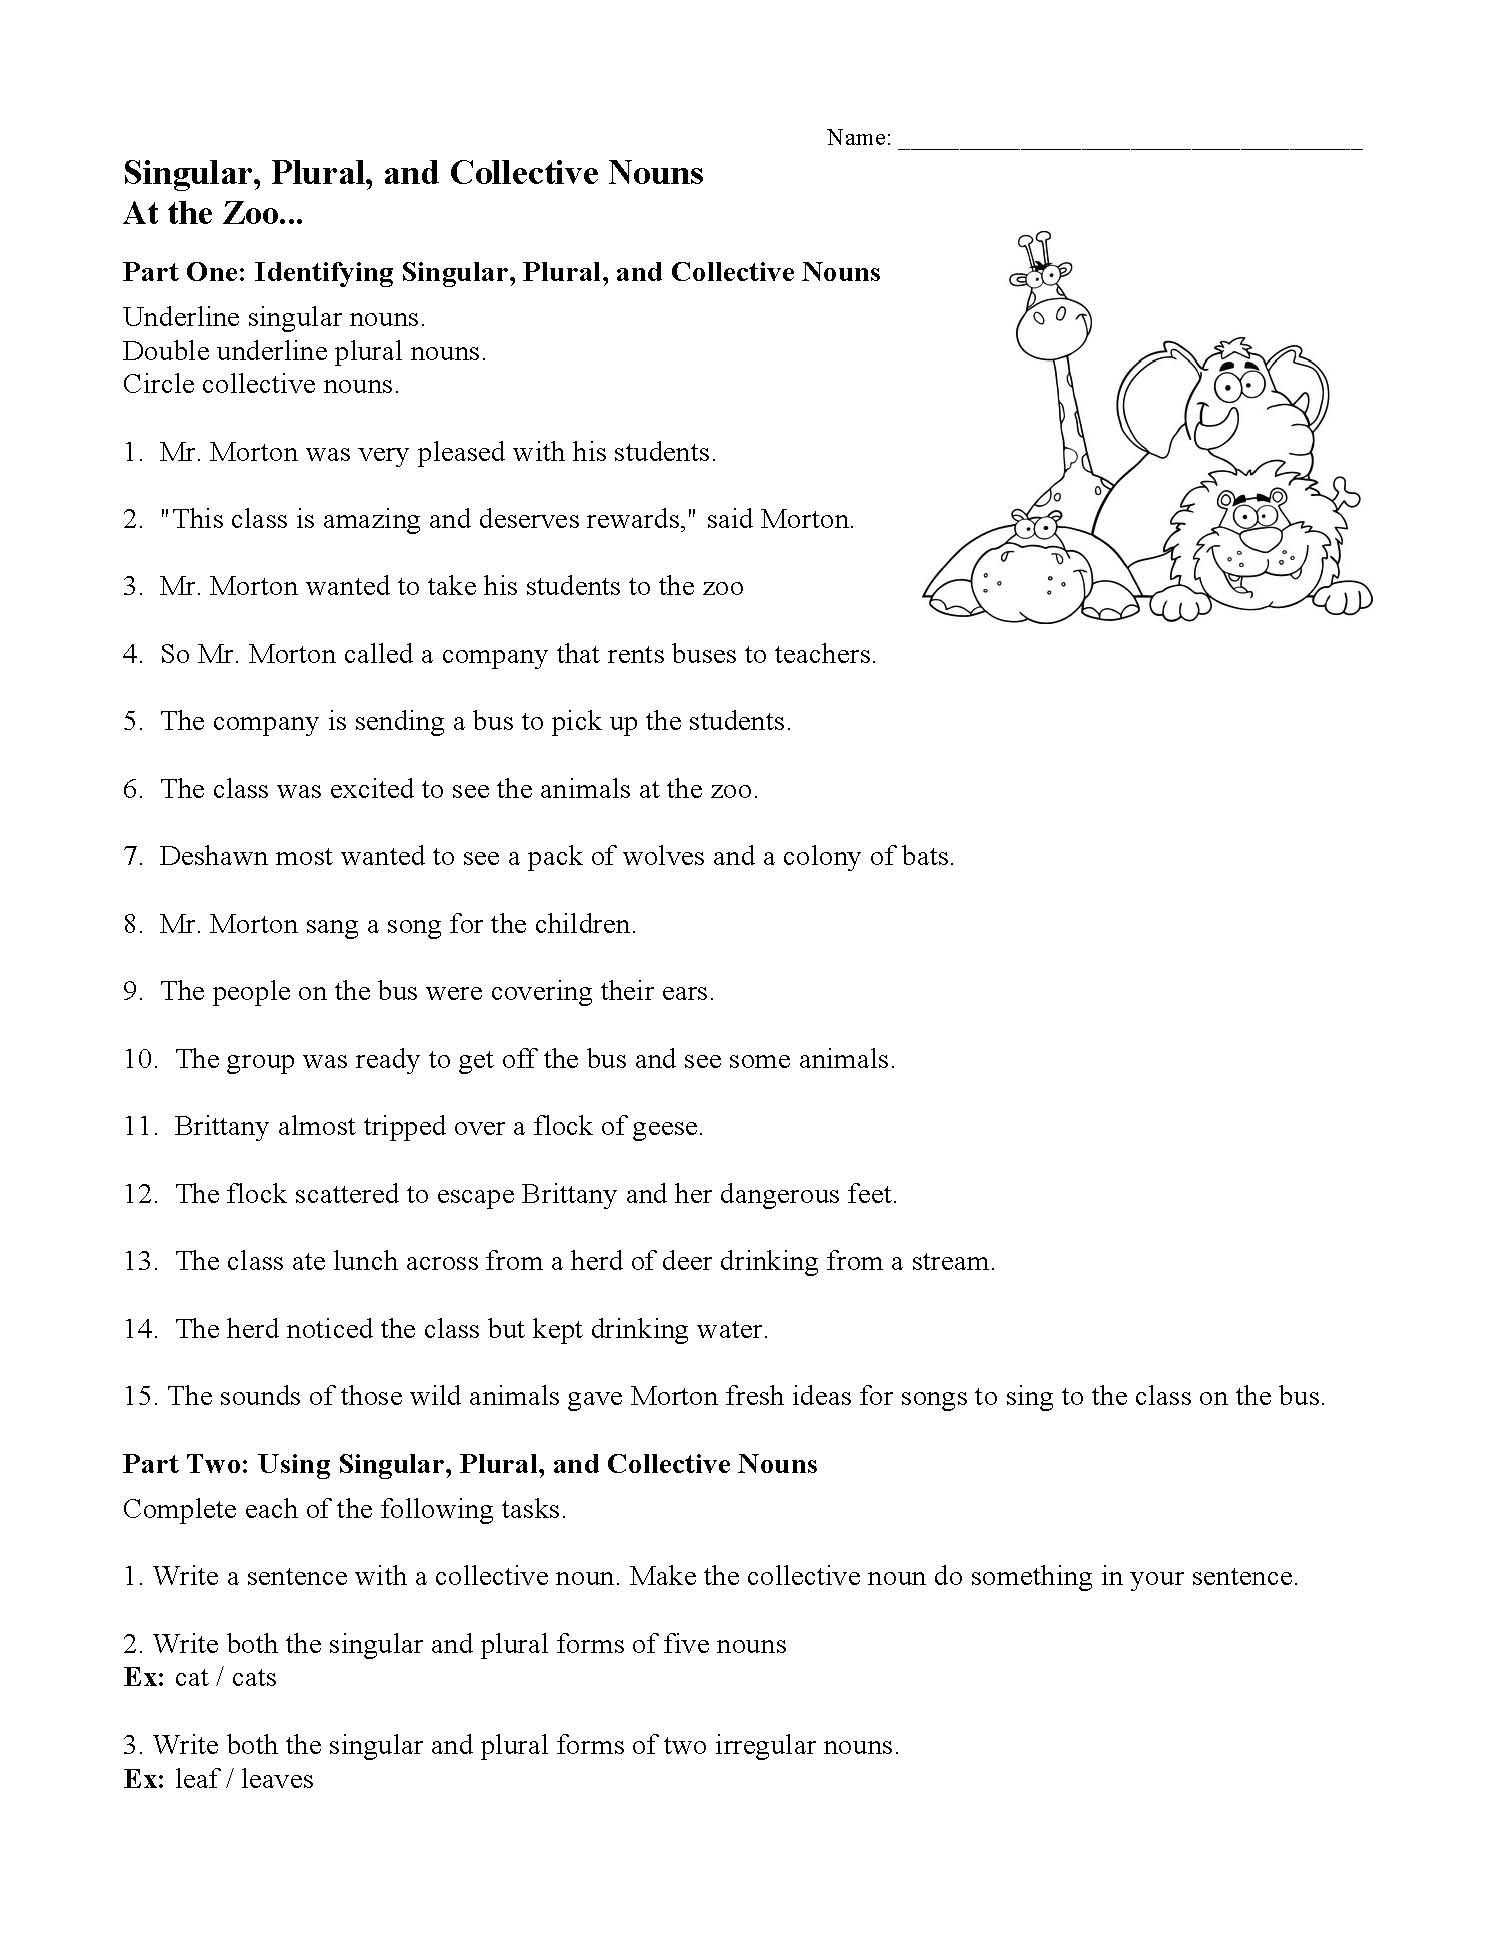 Singular Plural And Collective Nouns Worksheet At The Zoo 